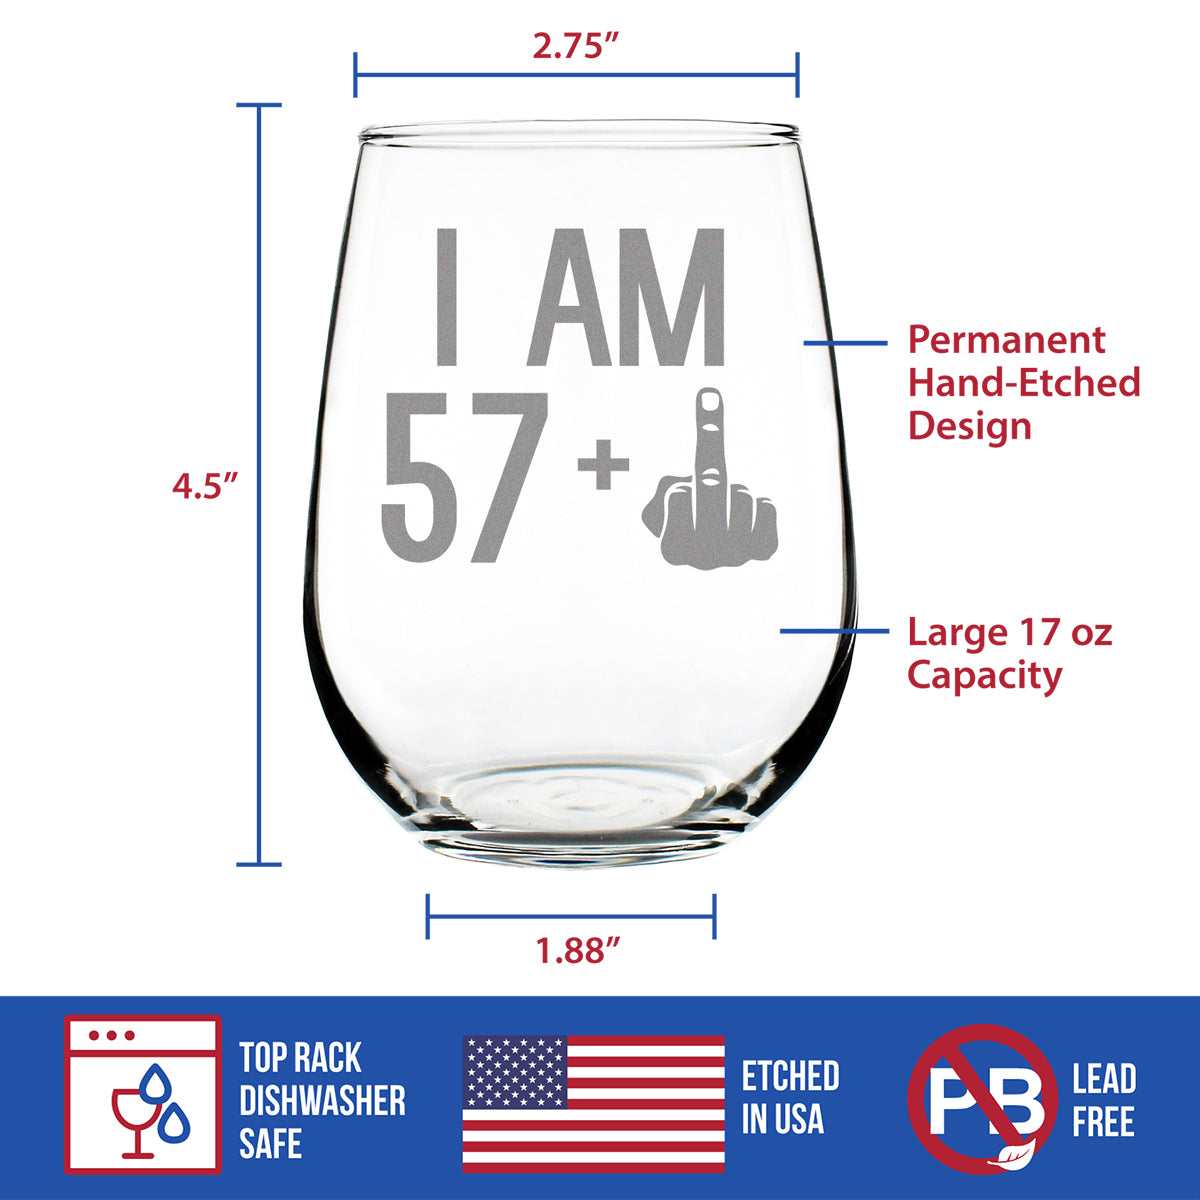 57 + 1 Middle Finger - 58th Birthday Stemless Wine Glass for Women &amp; Men - Cute Funny Wine Gift Idea - Unique Personalized Bday Glasses for Best Friend Turning 58 - Drinking Party Decoration